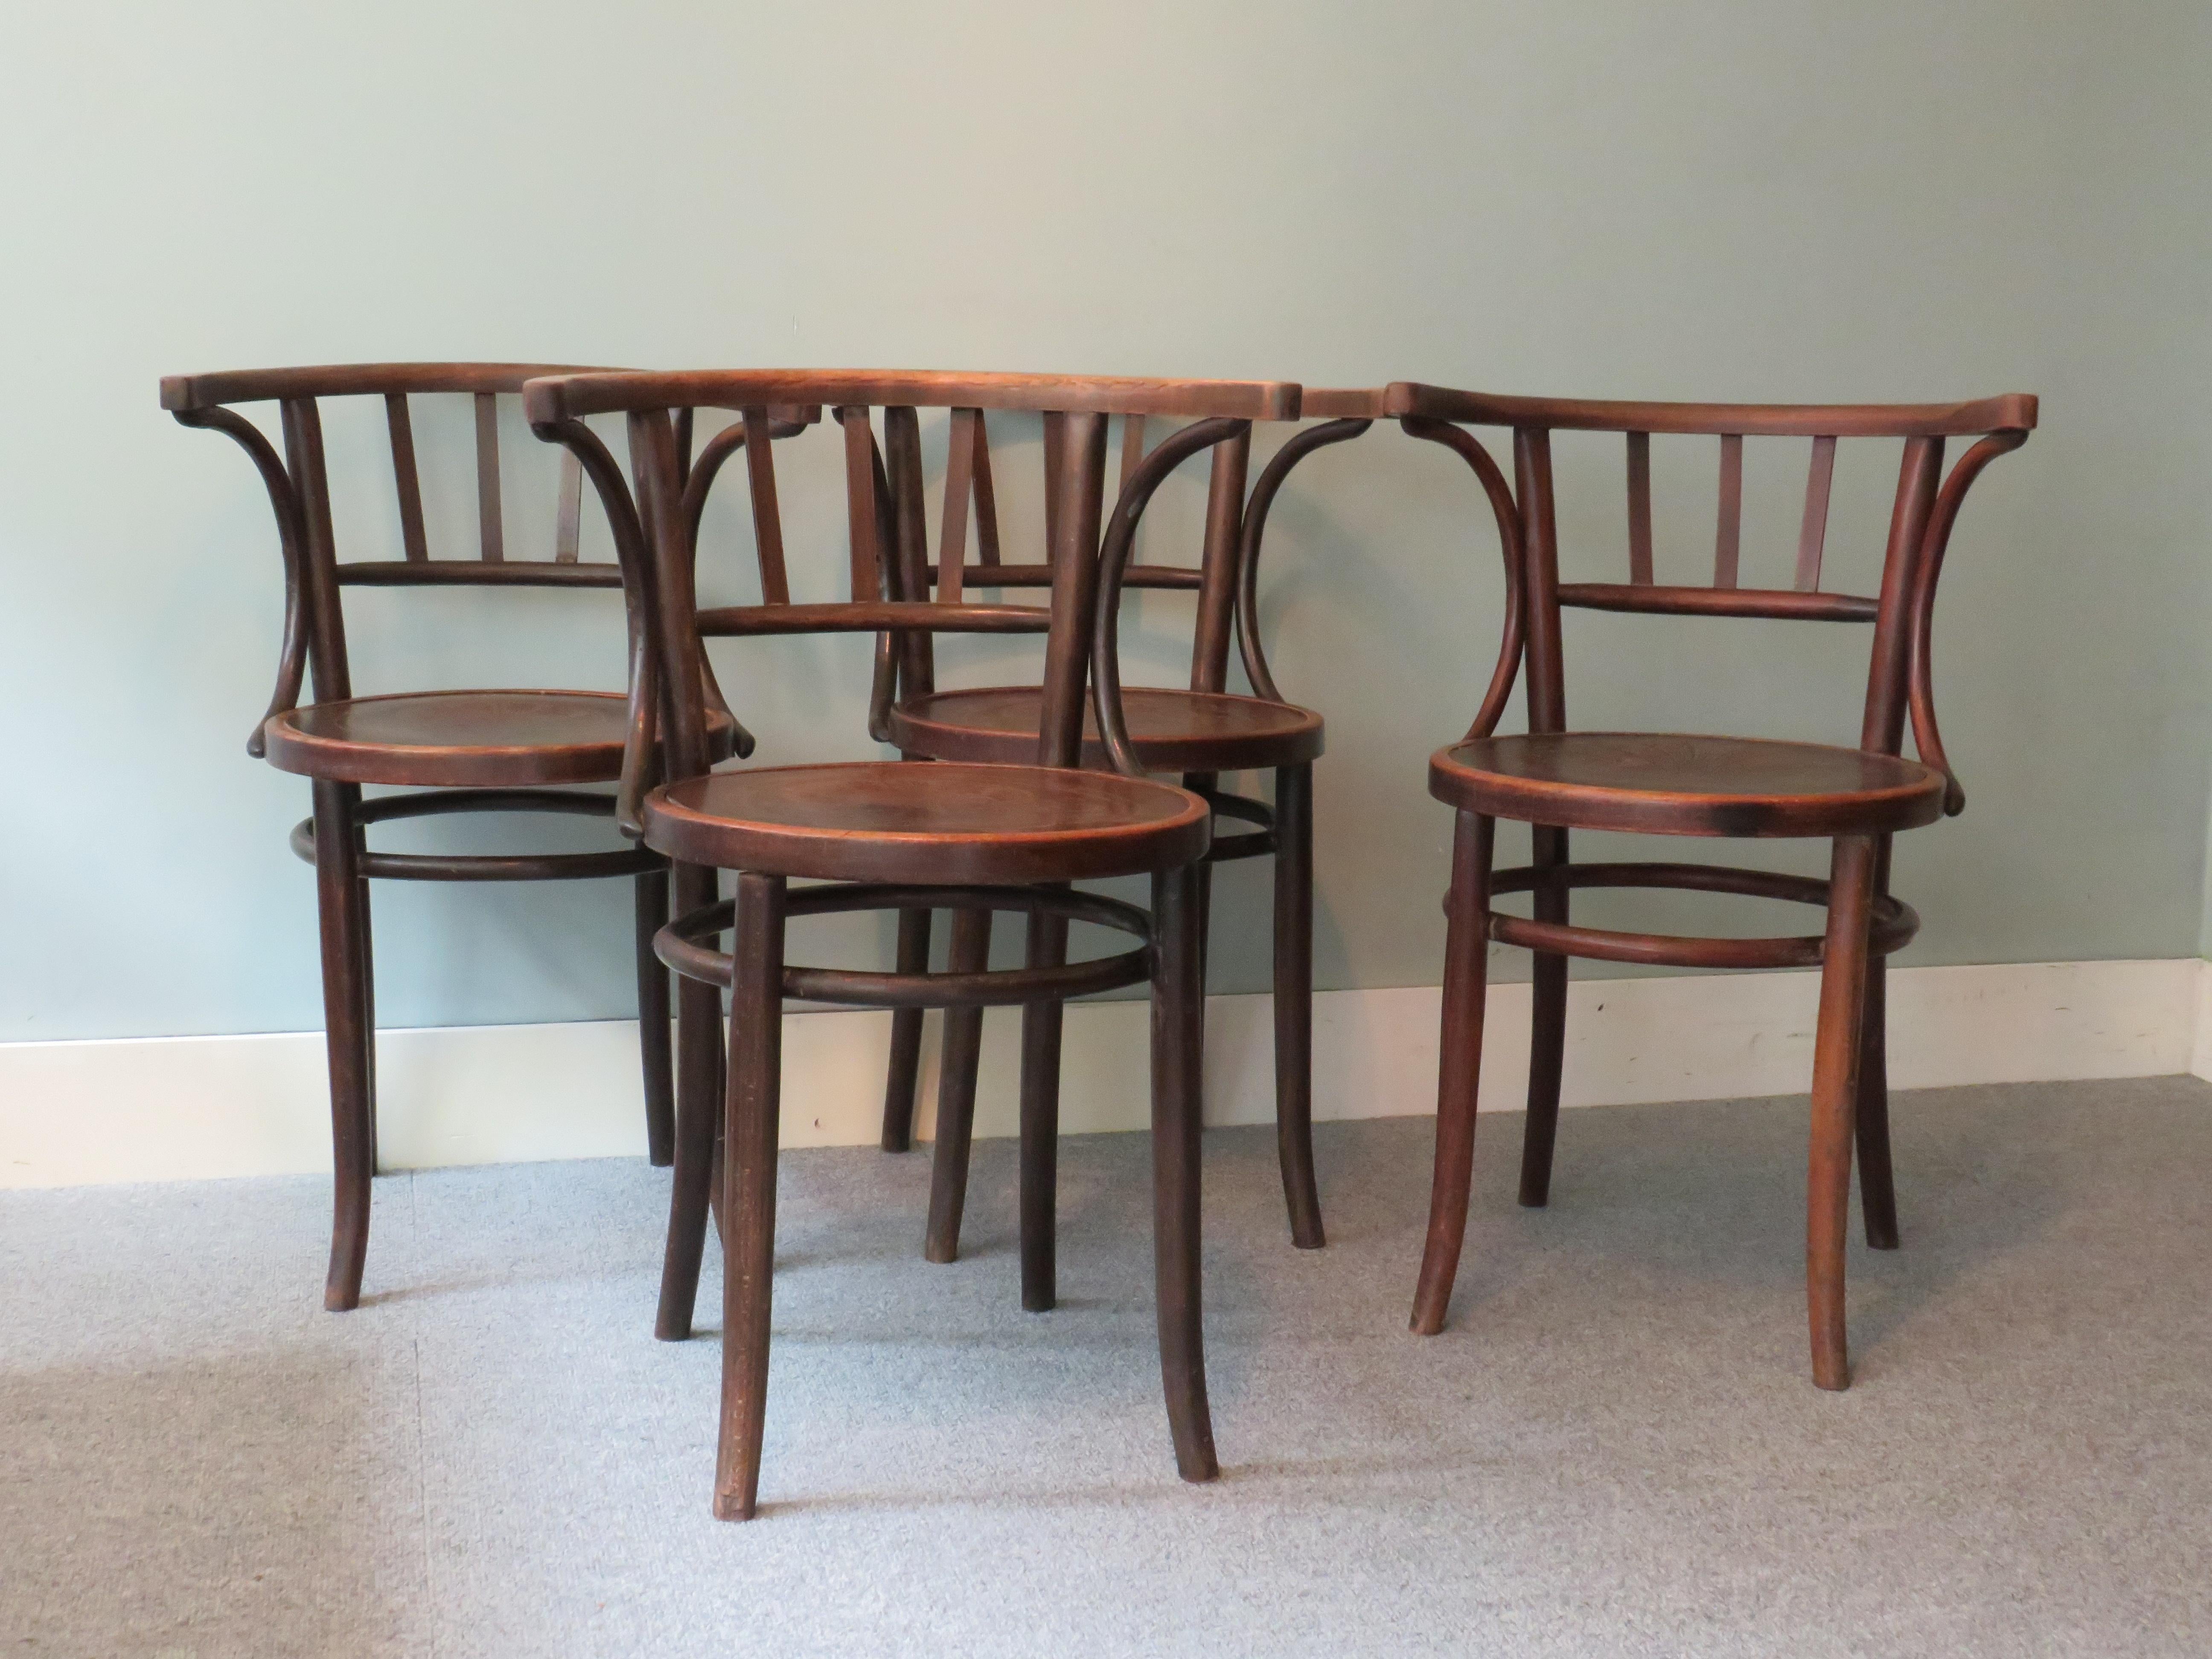 Set of 4 armchairs attributed at Thonet, Vienna Austria early 20th century.
Dimensions: H 77, W 43 and D 43 cm.
The seat height is 47 cm.
Width of backrest is 55 cm and diameter of the seat is 40 cm.